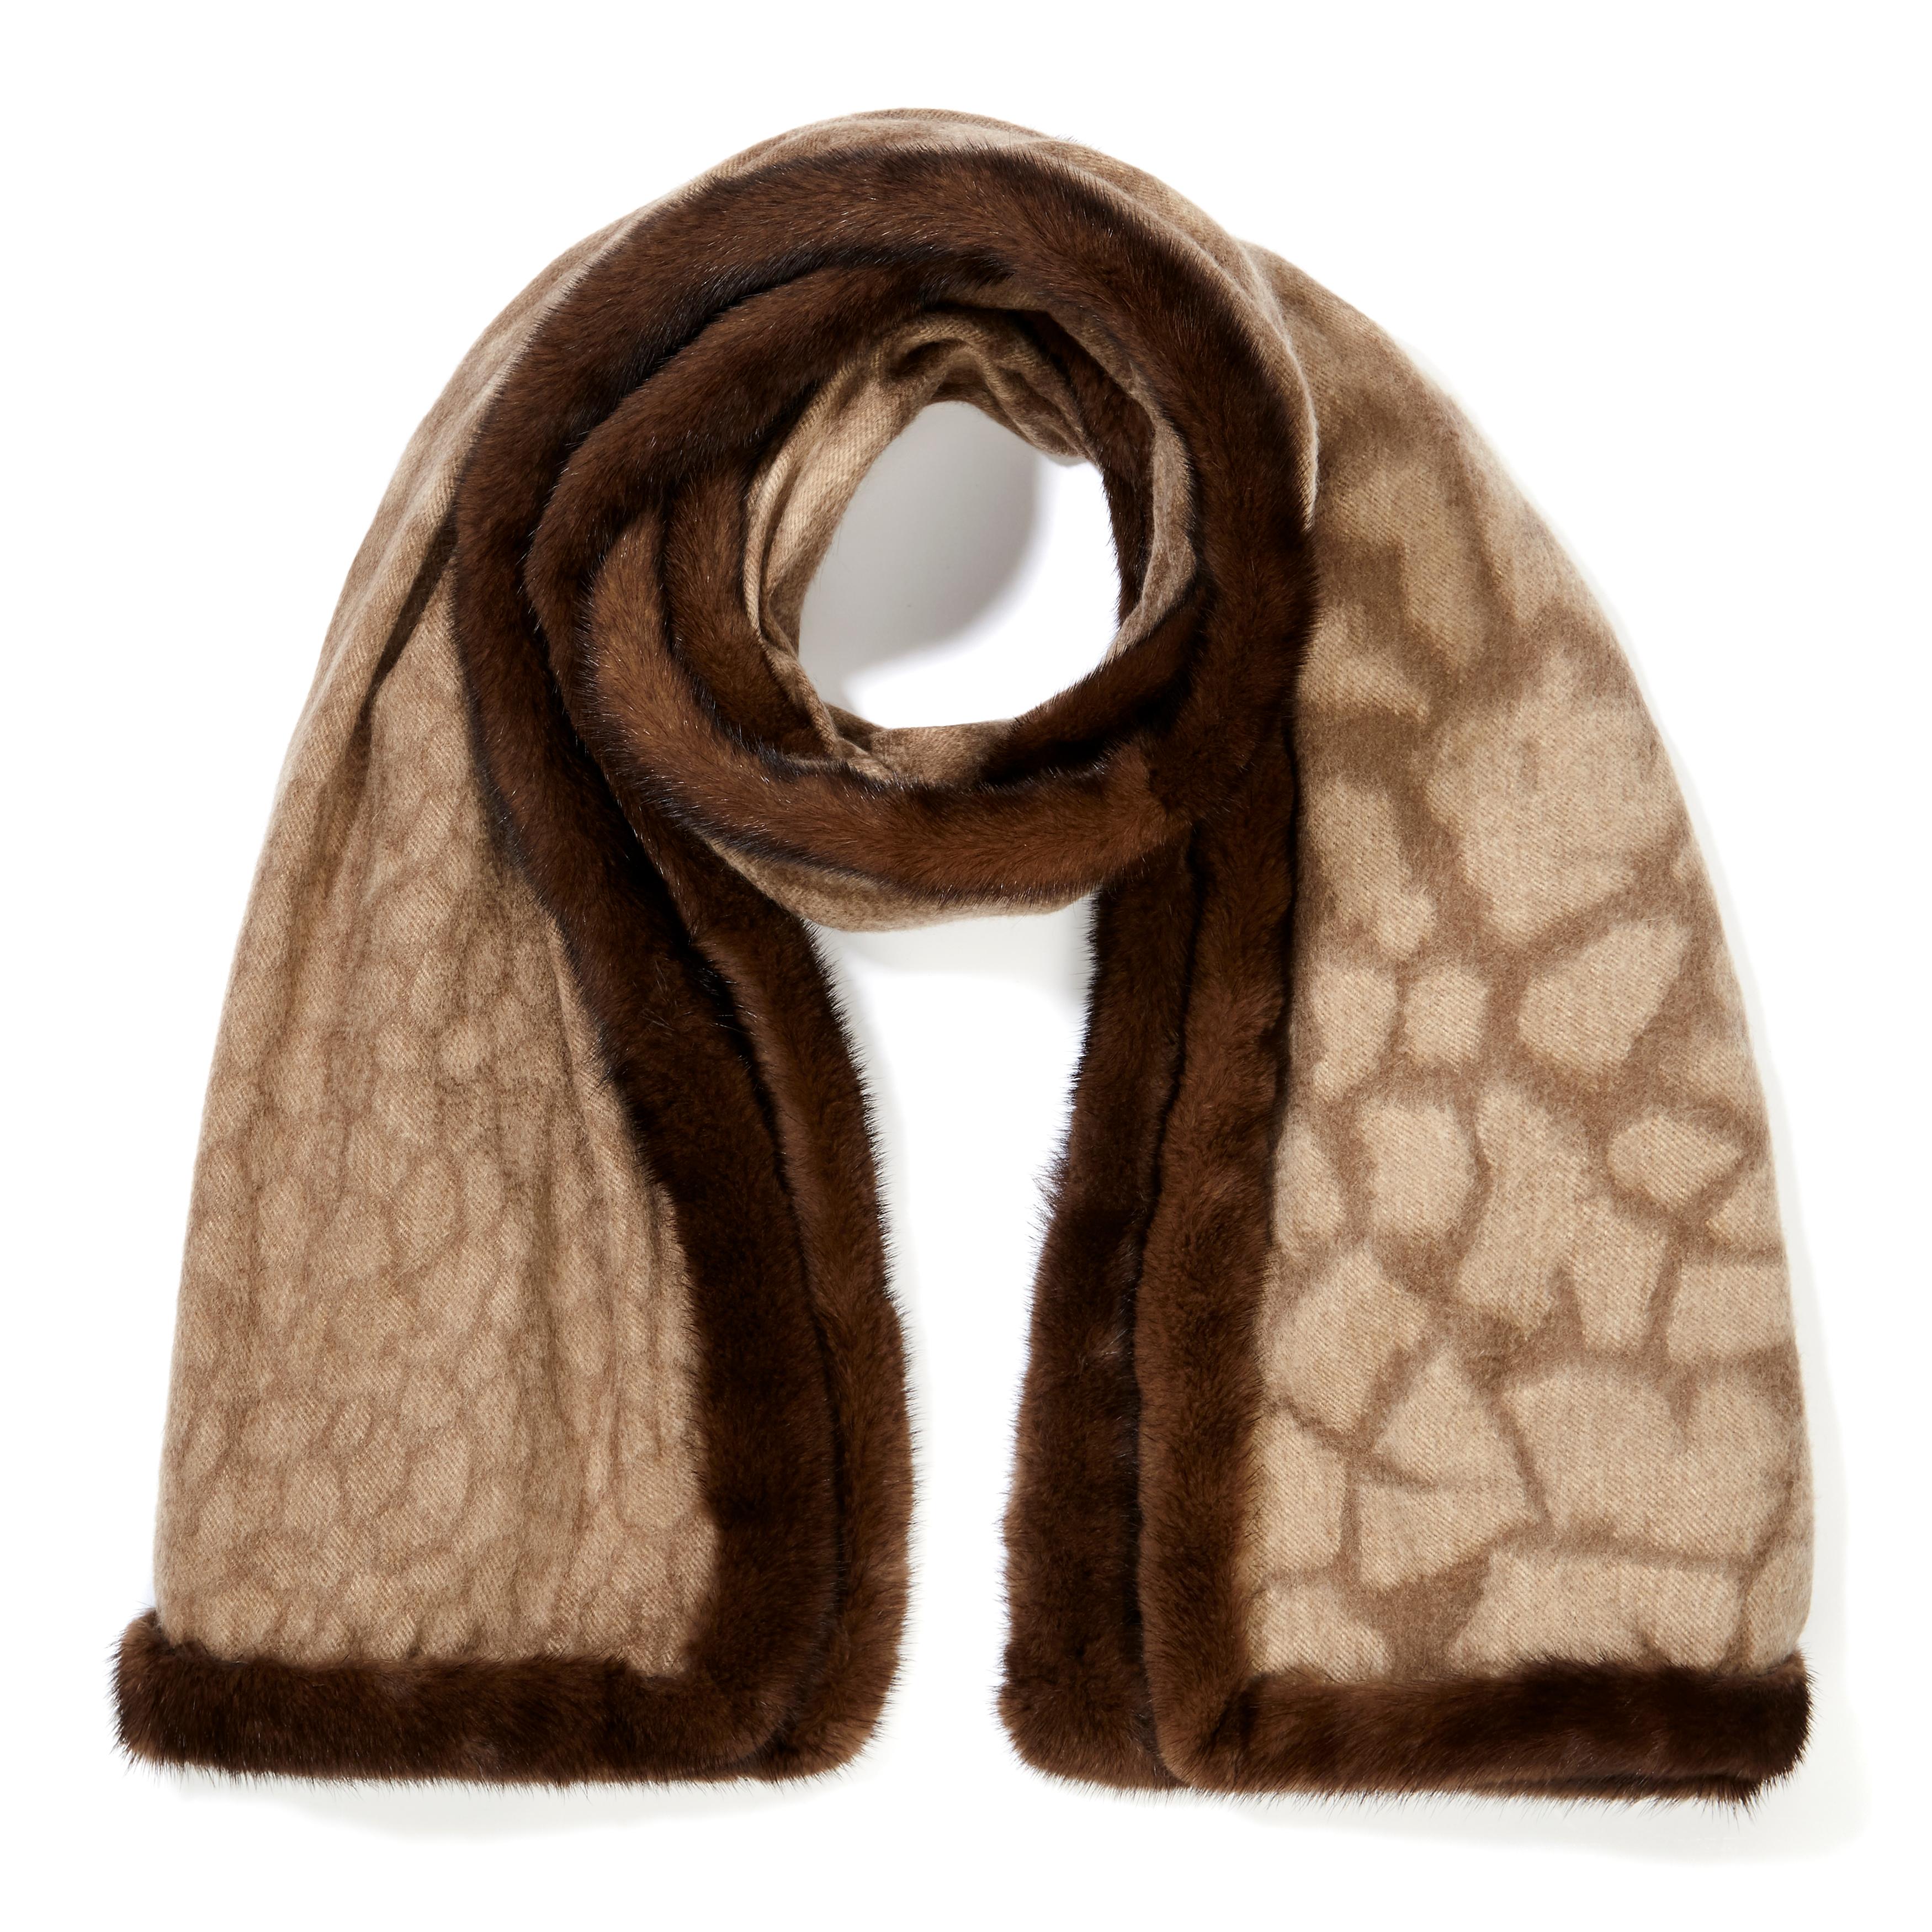 Verheyen London Mink Fur Trimmed Cashmere Scarf in Brown Leopard 

Verheyen London’s shawl is spun from the finest Scottish woven cashmere and finished with the most exquisite dyed mink. Its warmth envelopes you with luxury, perfect for travel and